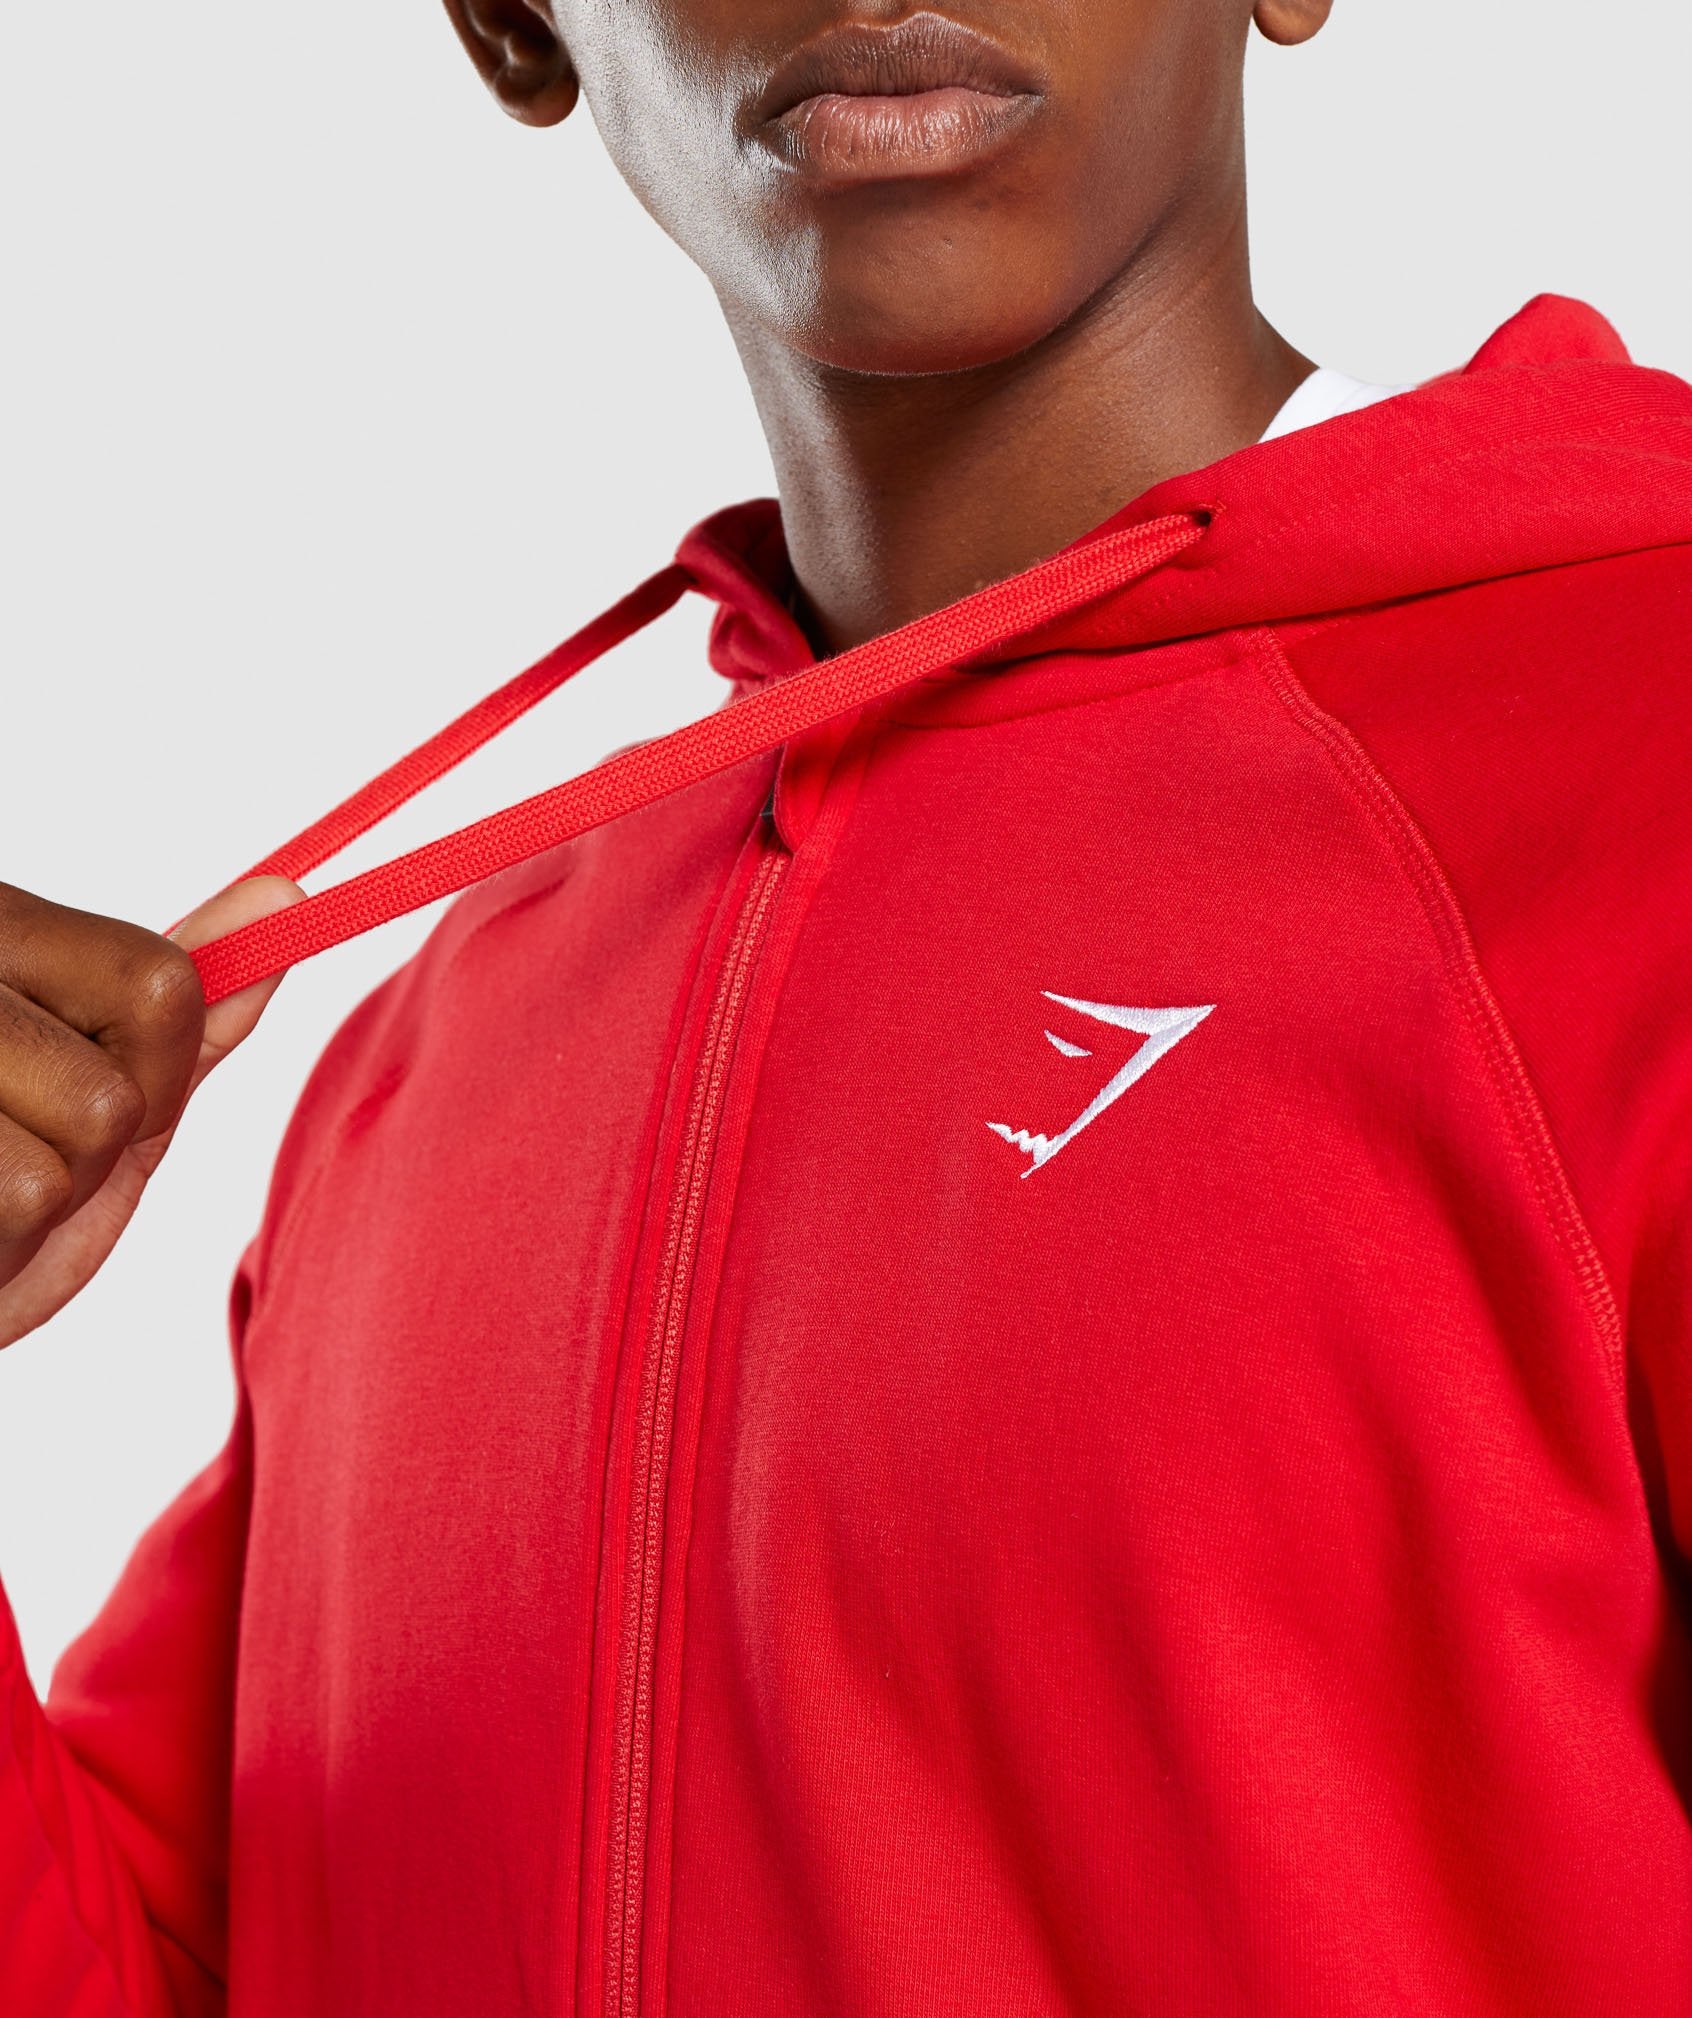 Crest Zip Up Hoodie in Red - view 5